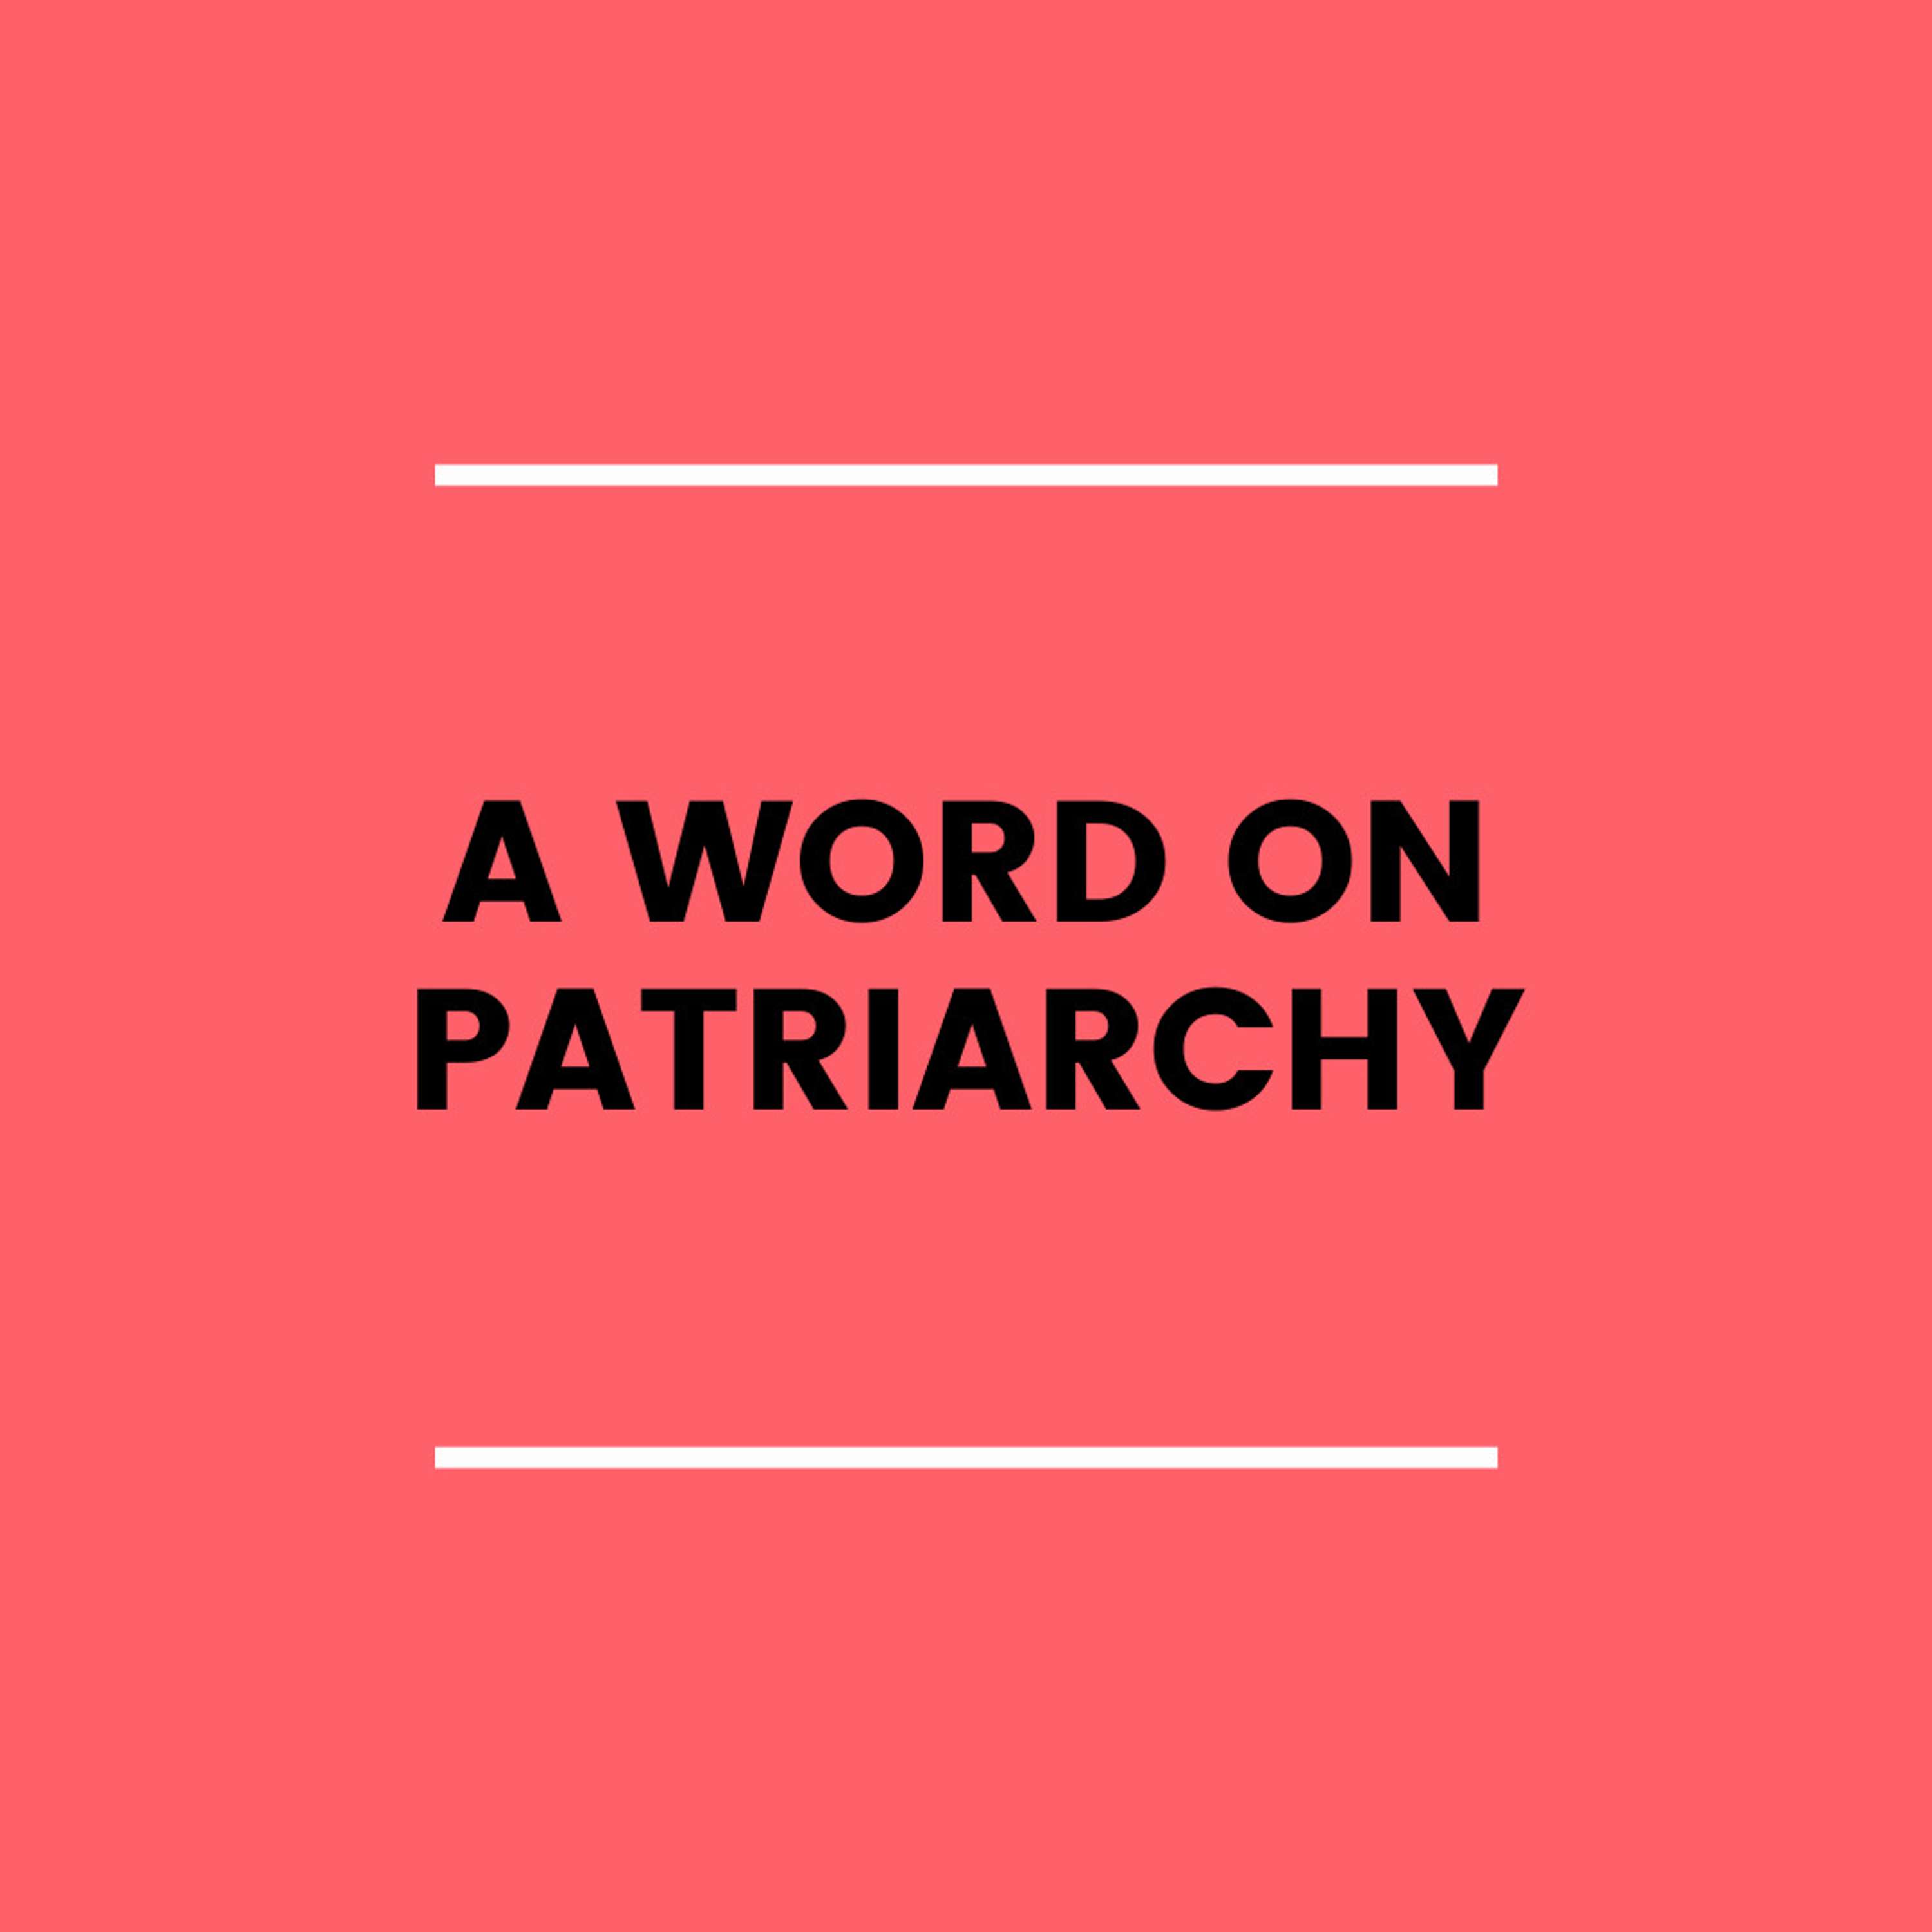 3. A Word on Patriarchy